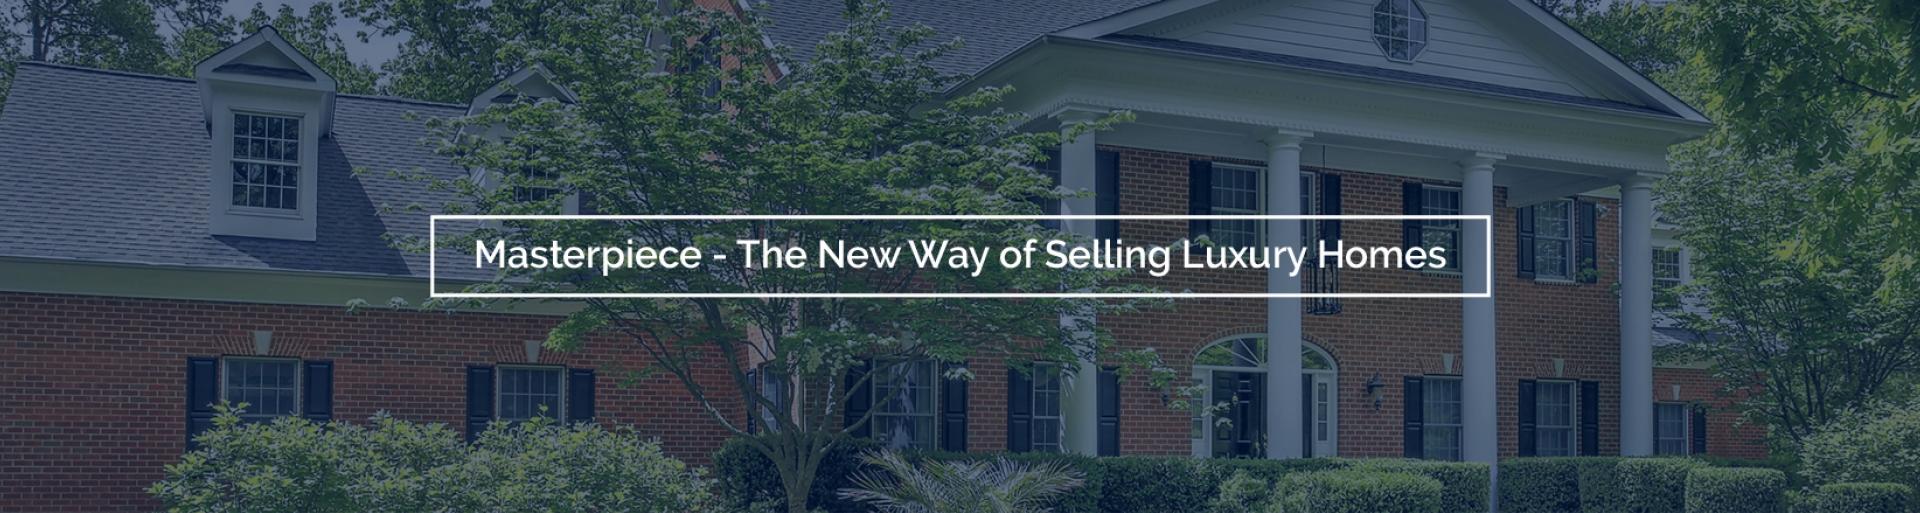 Masterpiece - The New Way of Selling Luxury Homes